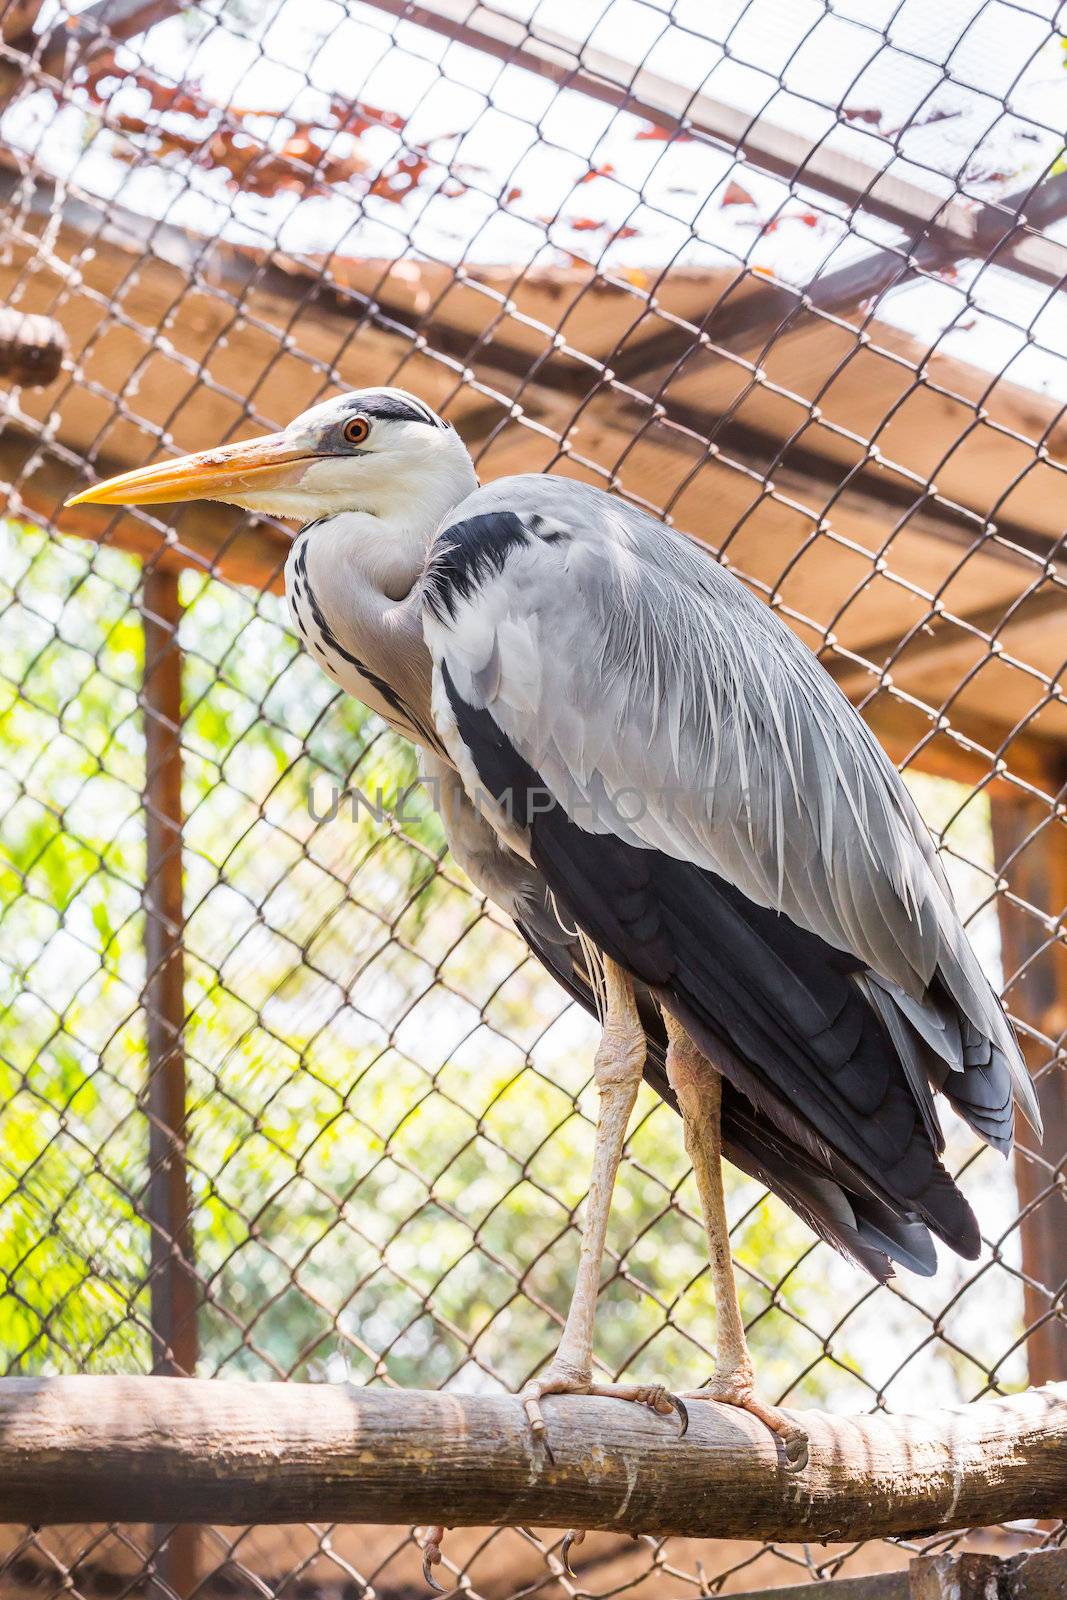 White stork in zoo looking outside without freedom